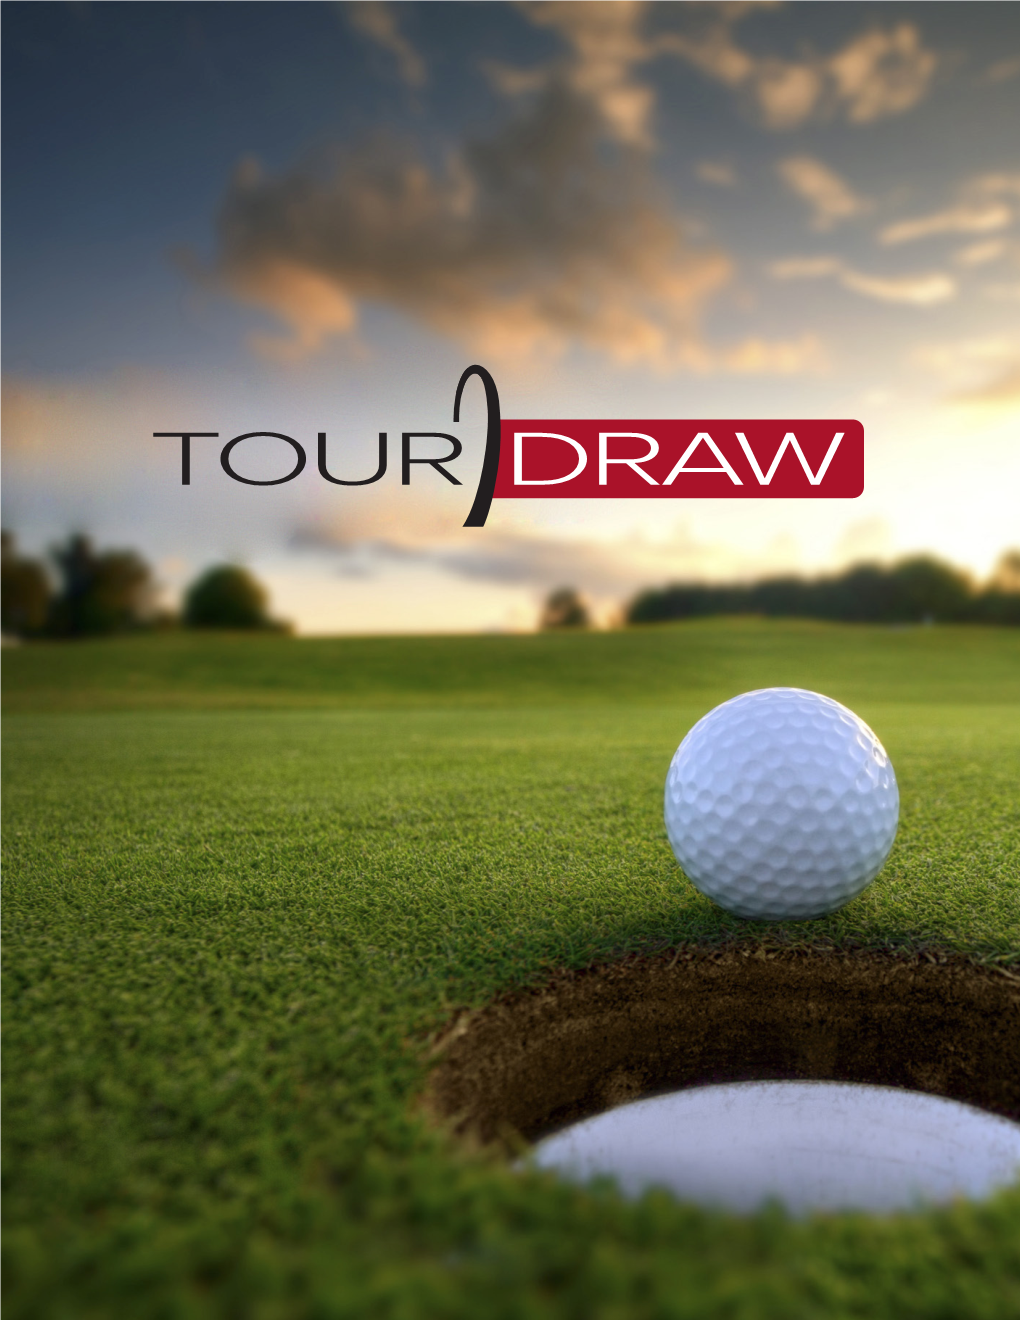 Tour Draw Ebook.Indd